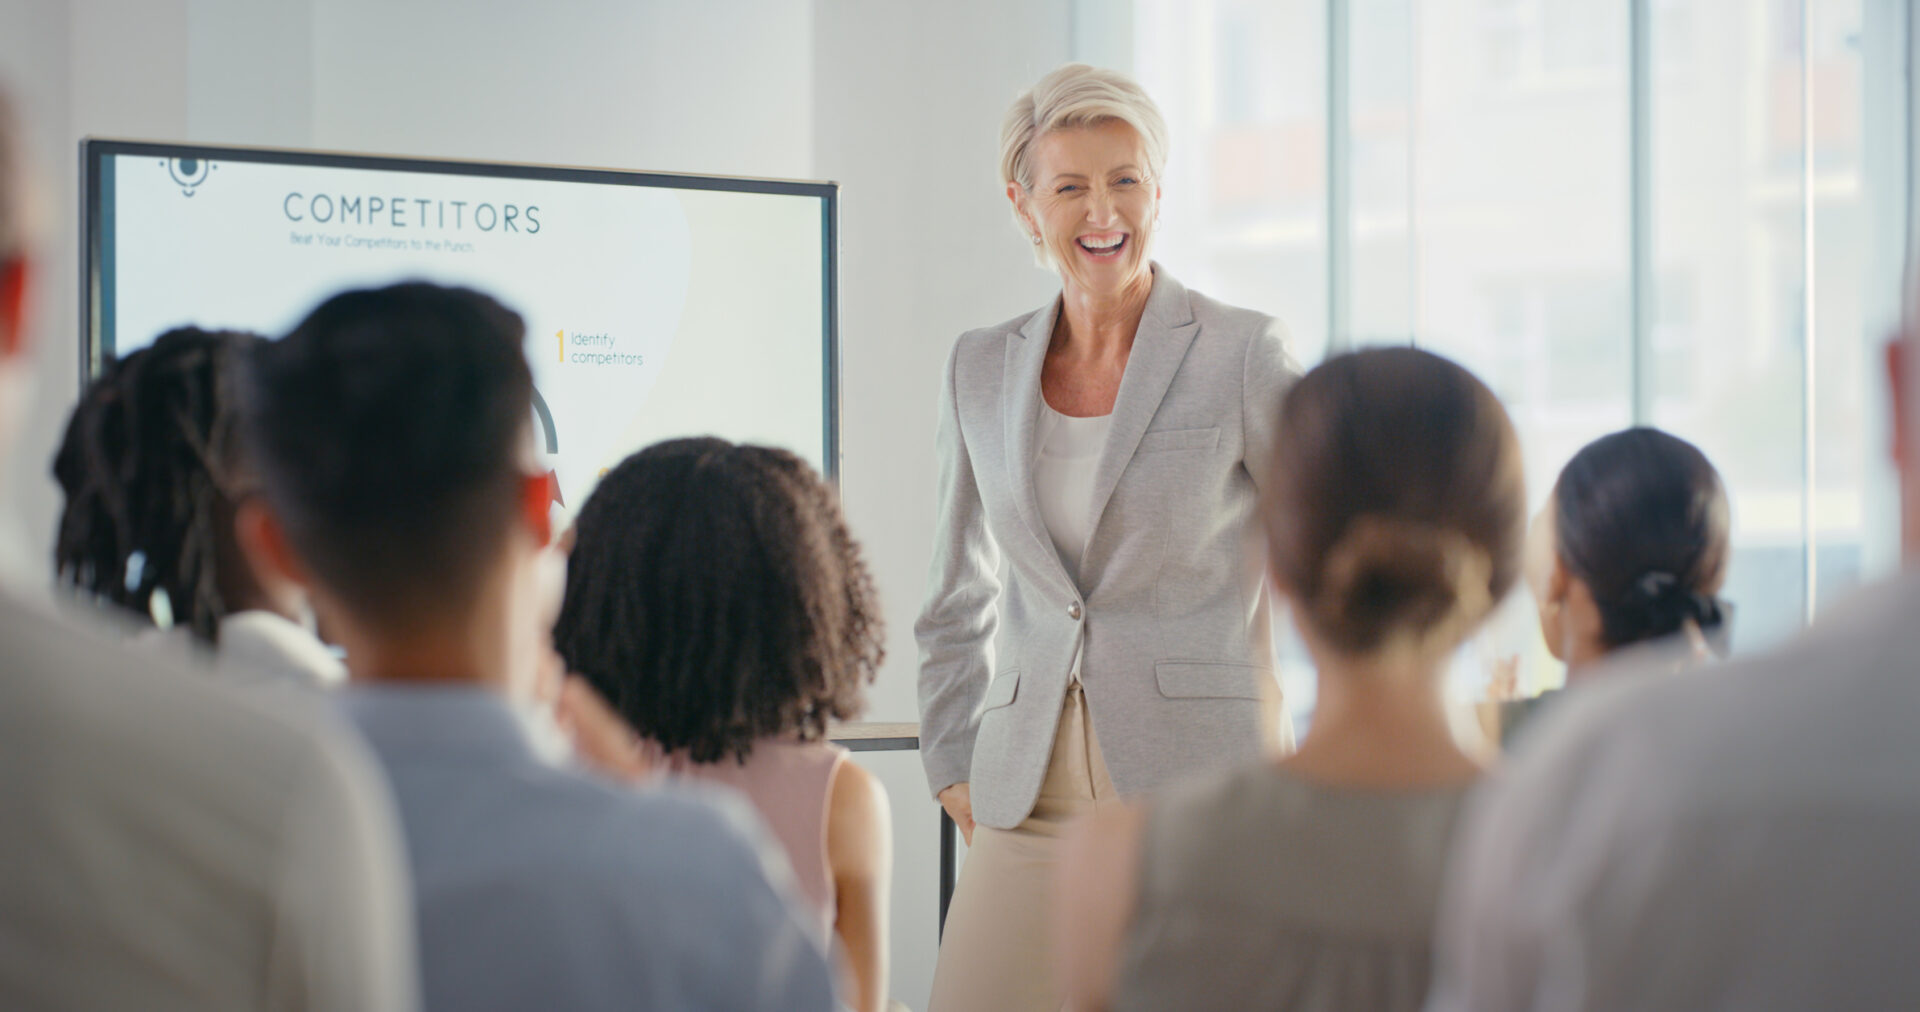 Female leader, manager or CEO giving a presentation in a workshop or seminar for training, learning and coaching at work. Mature business woman talking to an audience and laughing during a conference